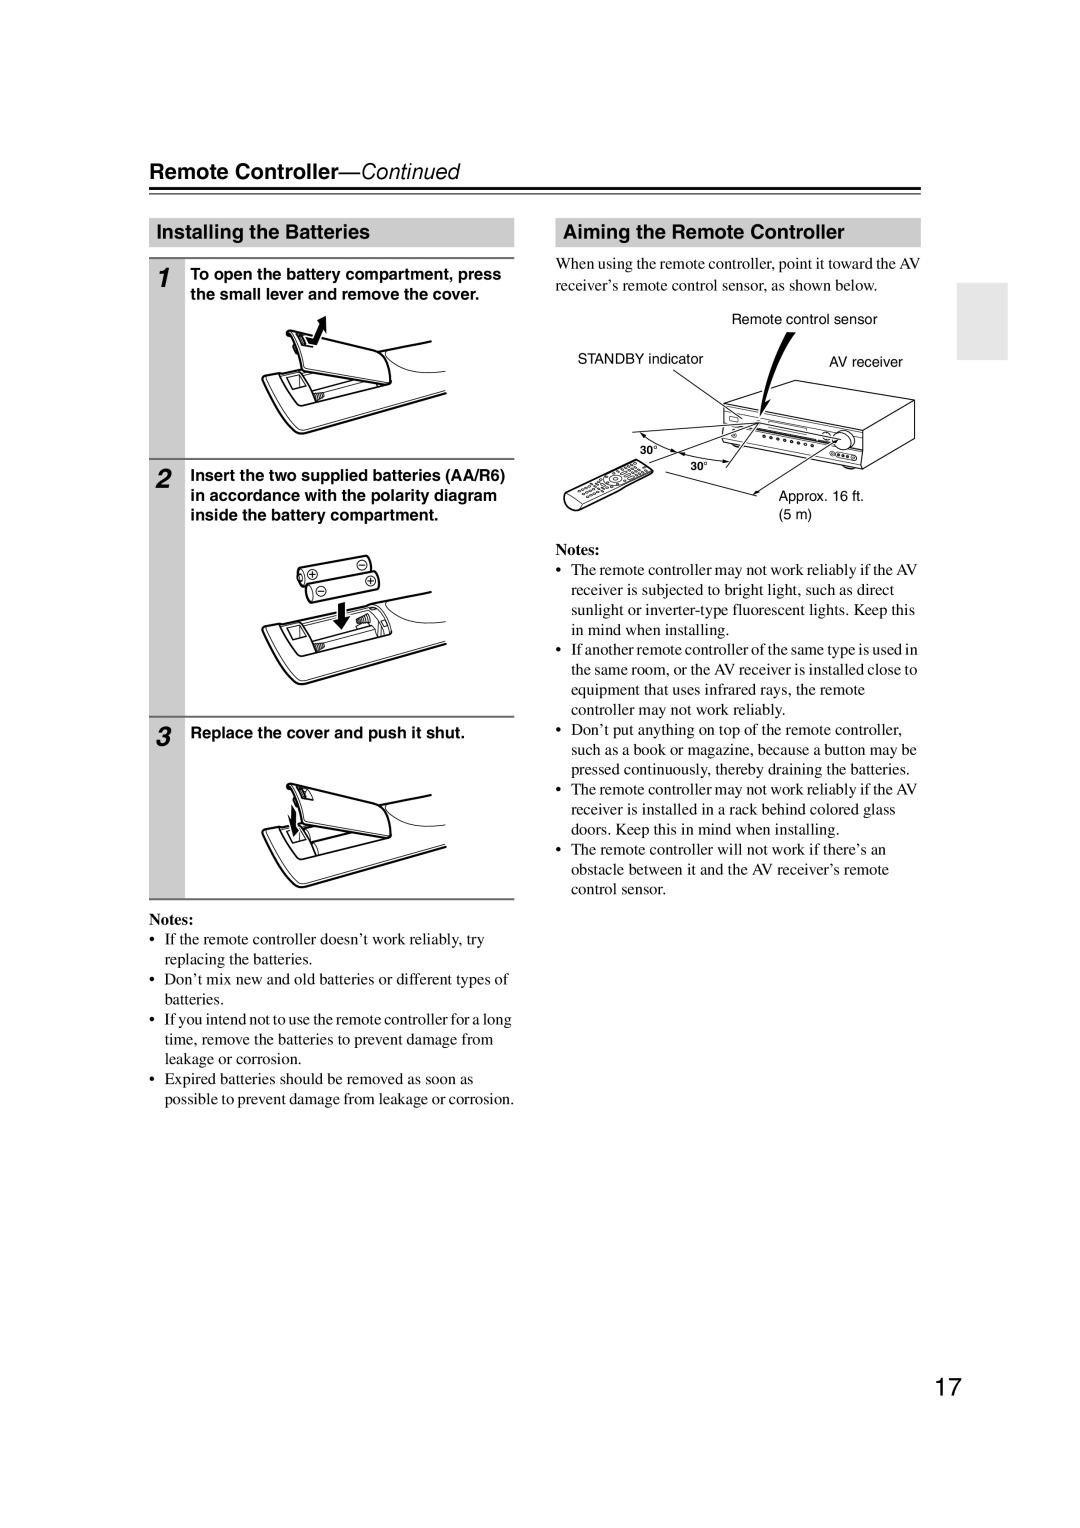 Onkyo HT-S5200 instruction manual Installing the Batteries, Aiming the Remote Controller 